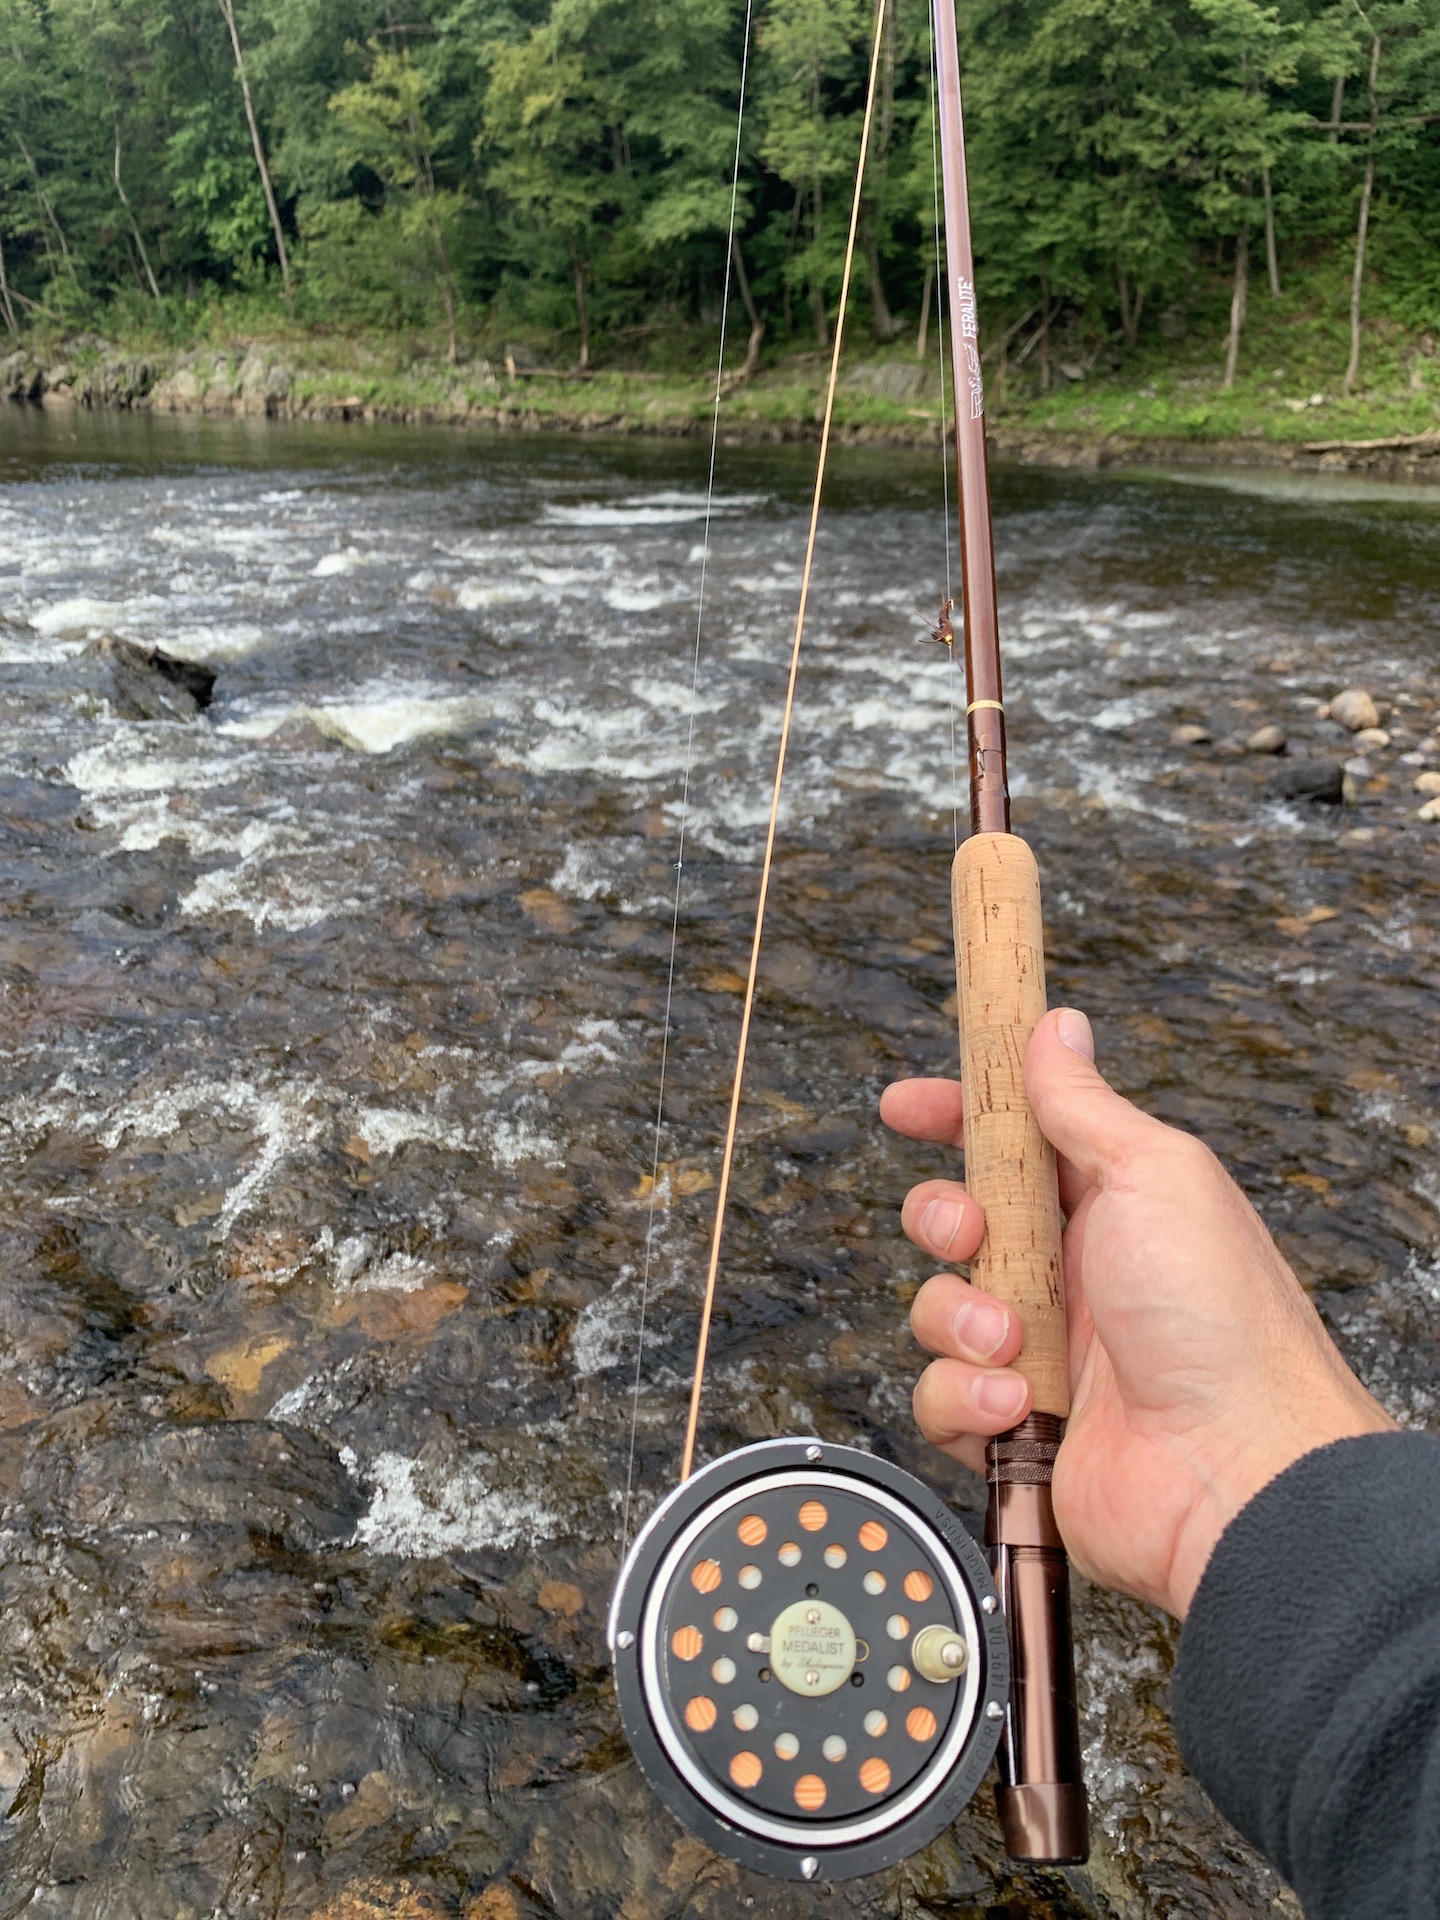 Fishing a FF805 and a Fenwick 96-6, Fishing with Fiberglass Fly Rods